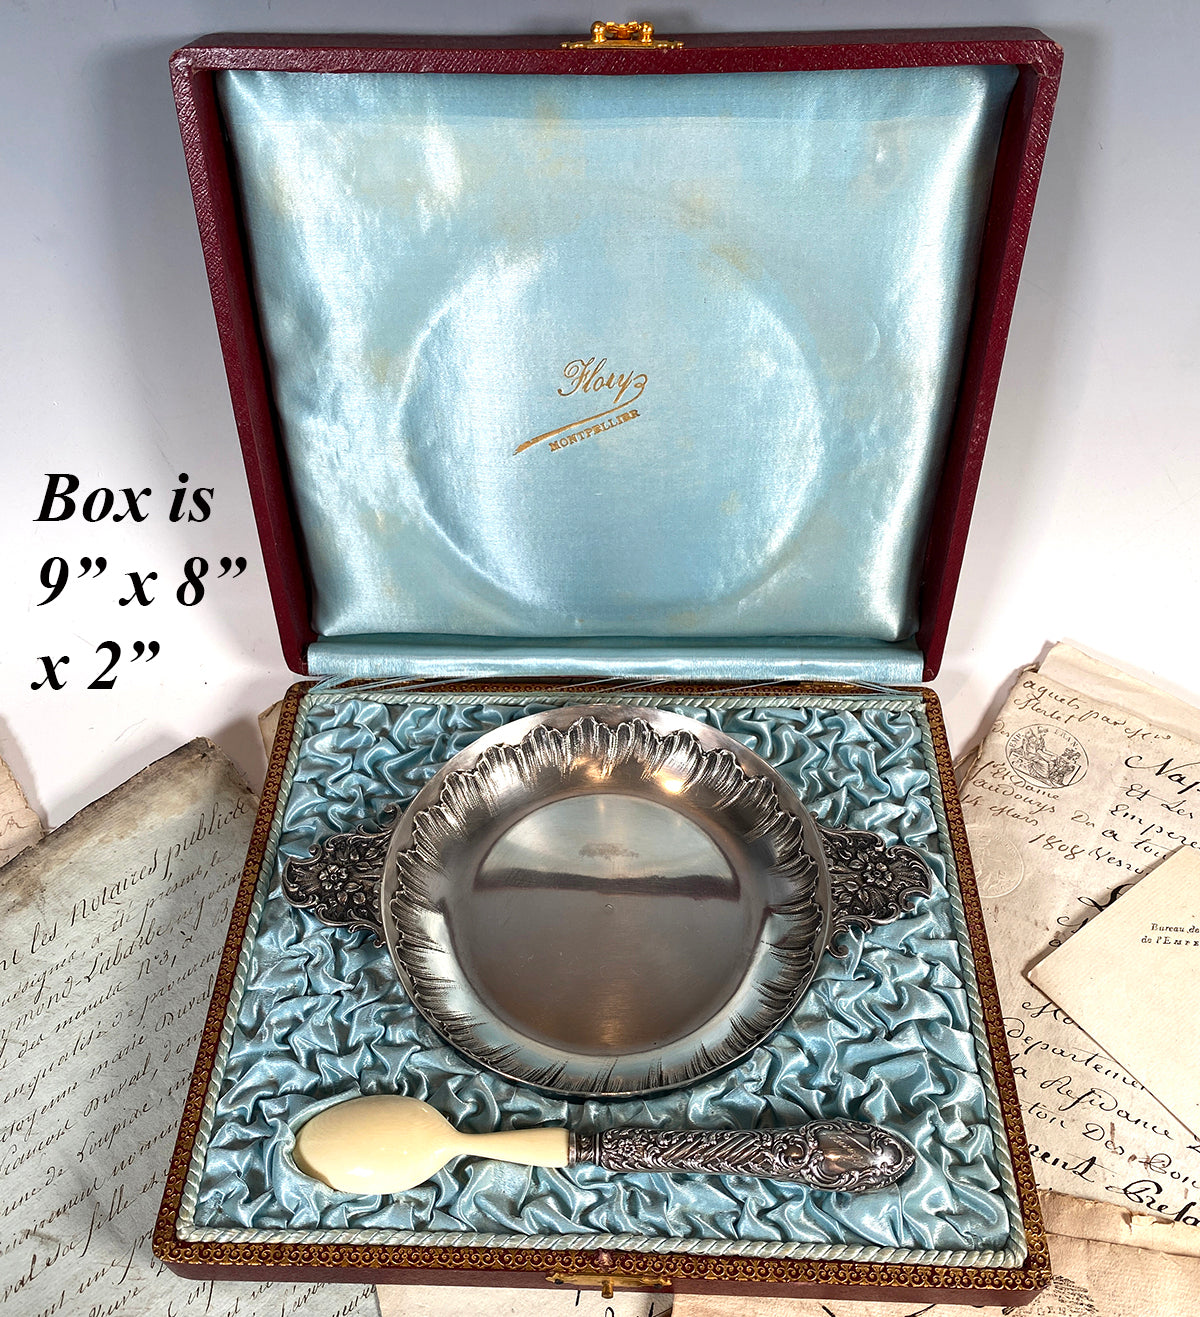 Antique French Sterling Silver Écuelle, Baby Gift, Bowl and Ivory Spoon Still in Presentation Box